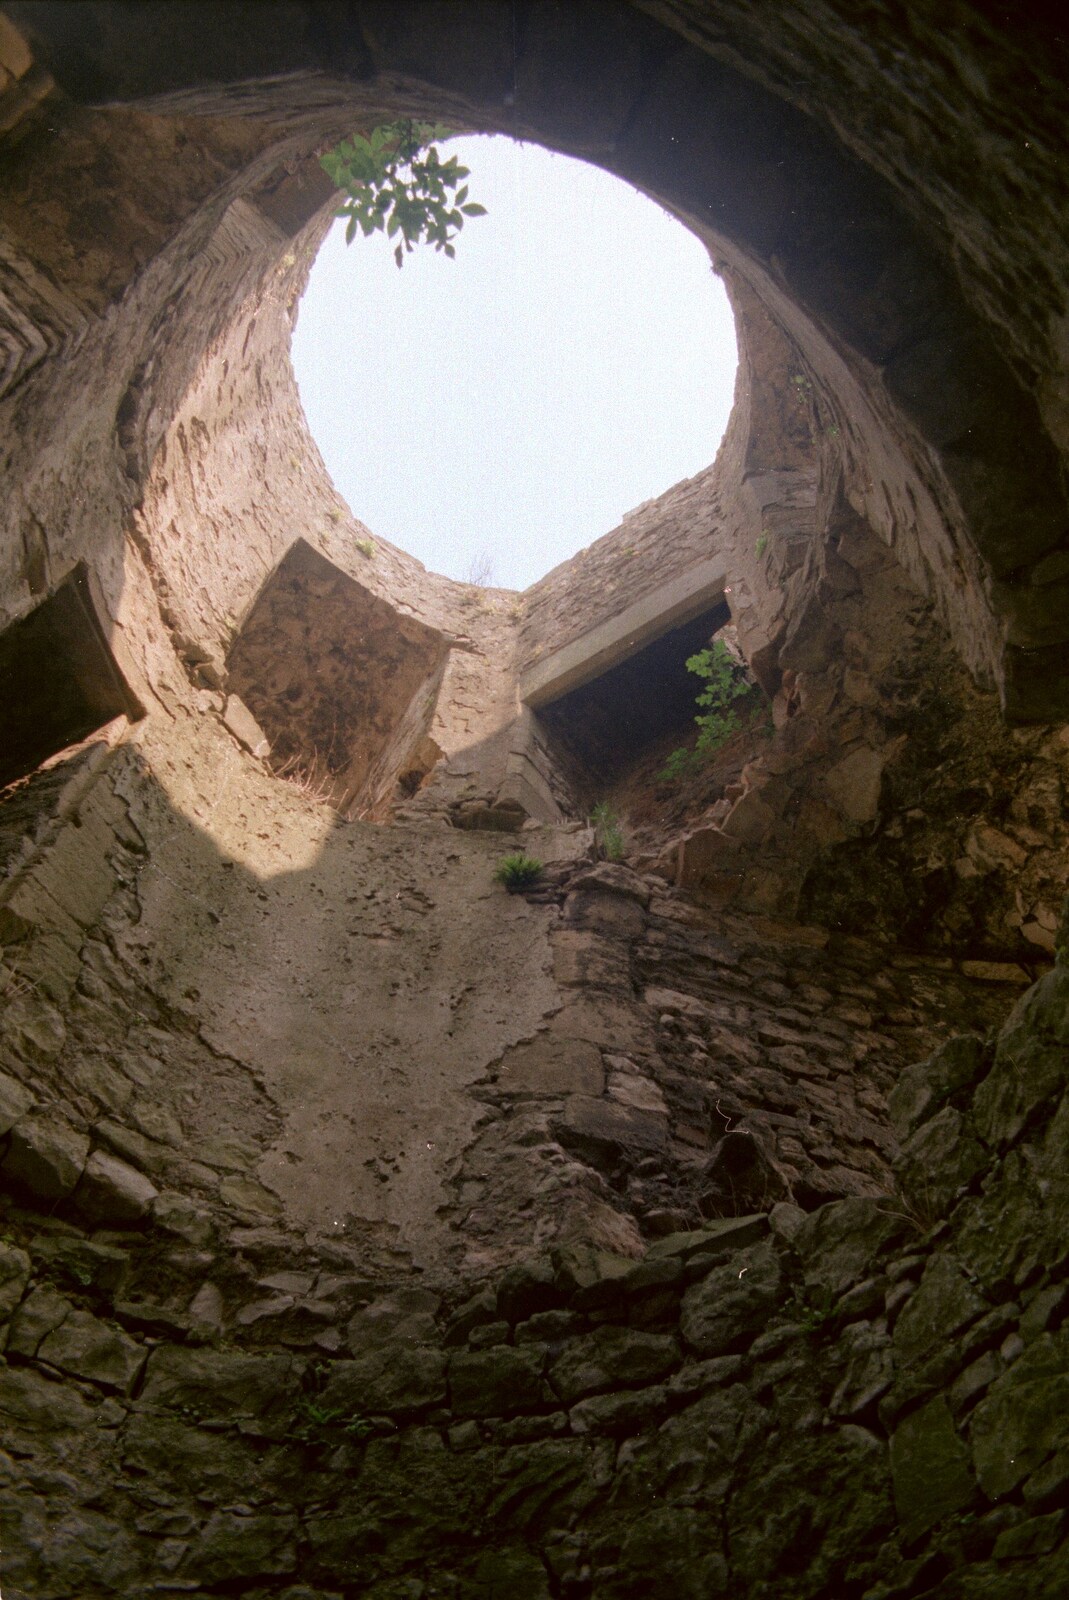 Looking up an open tower from A Trip to Chepstow, Monmouthshire, Wales - 5th July 1986